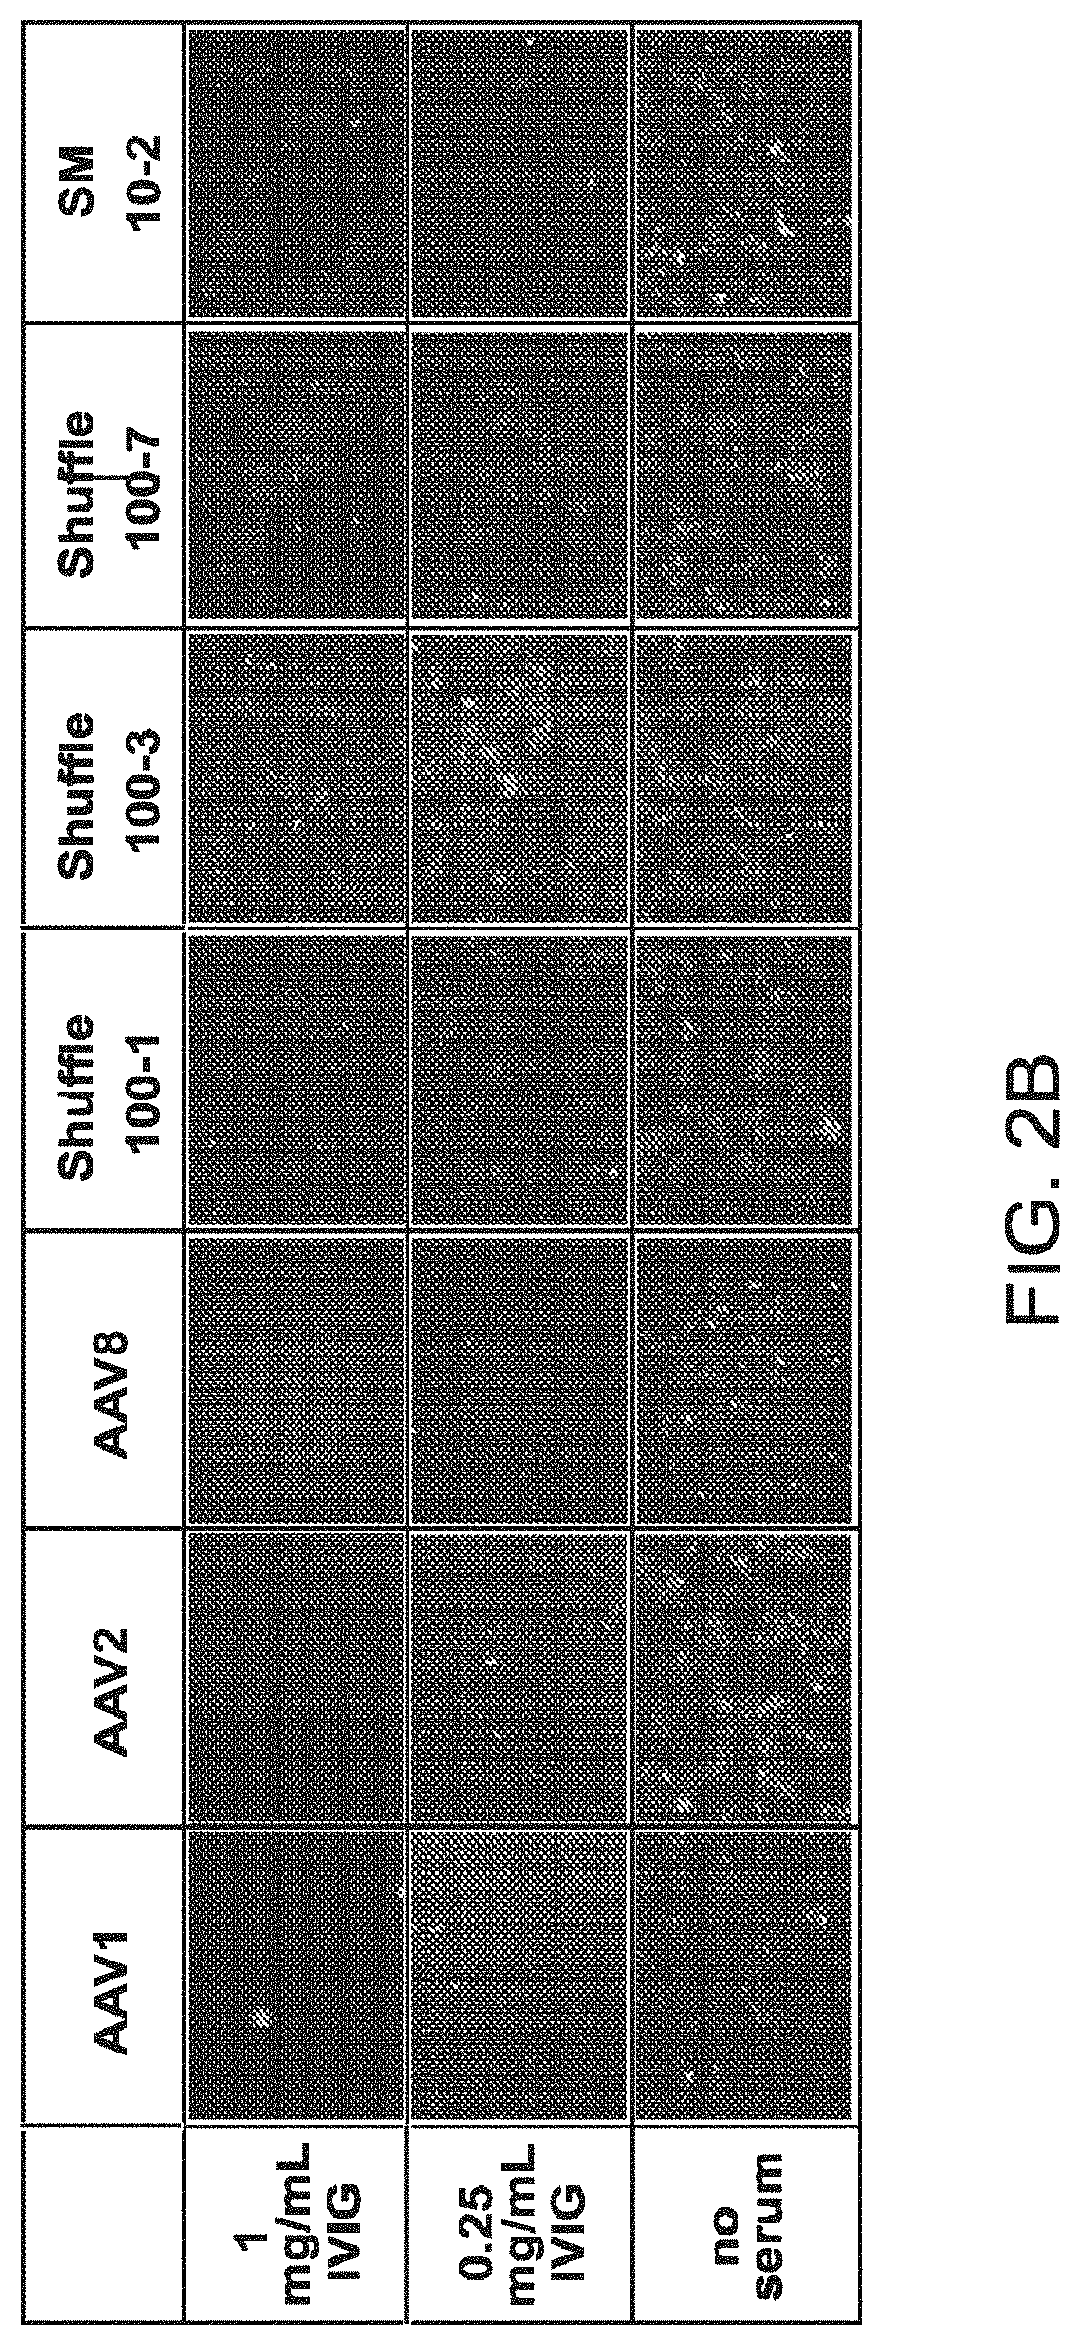 Adeno-associated variants, formulations and methods for pulmonary delivery